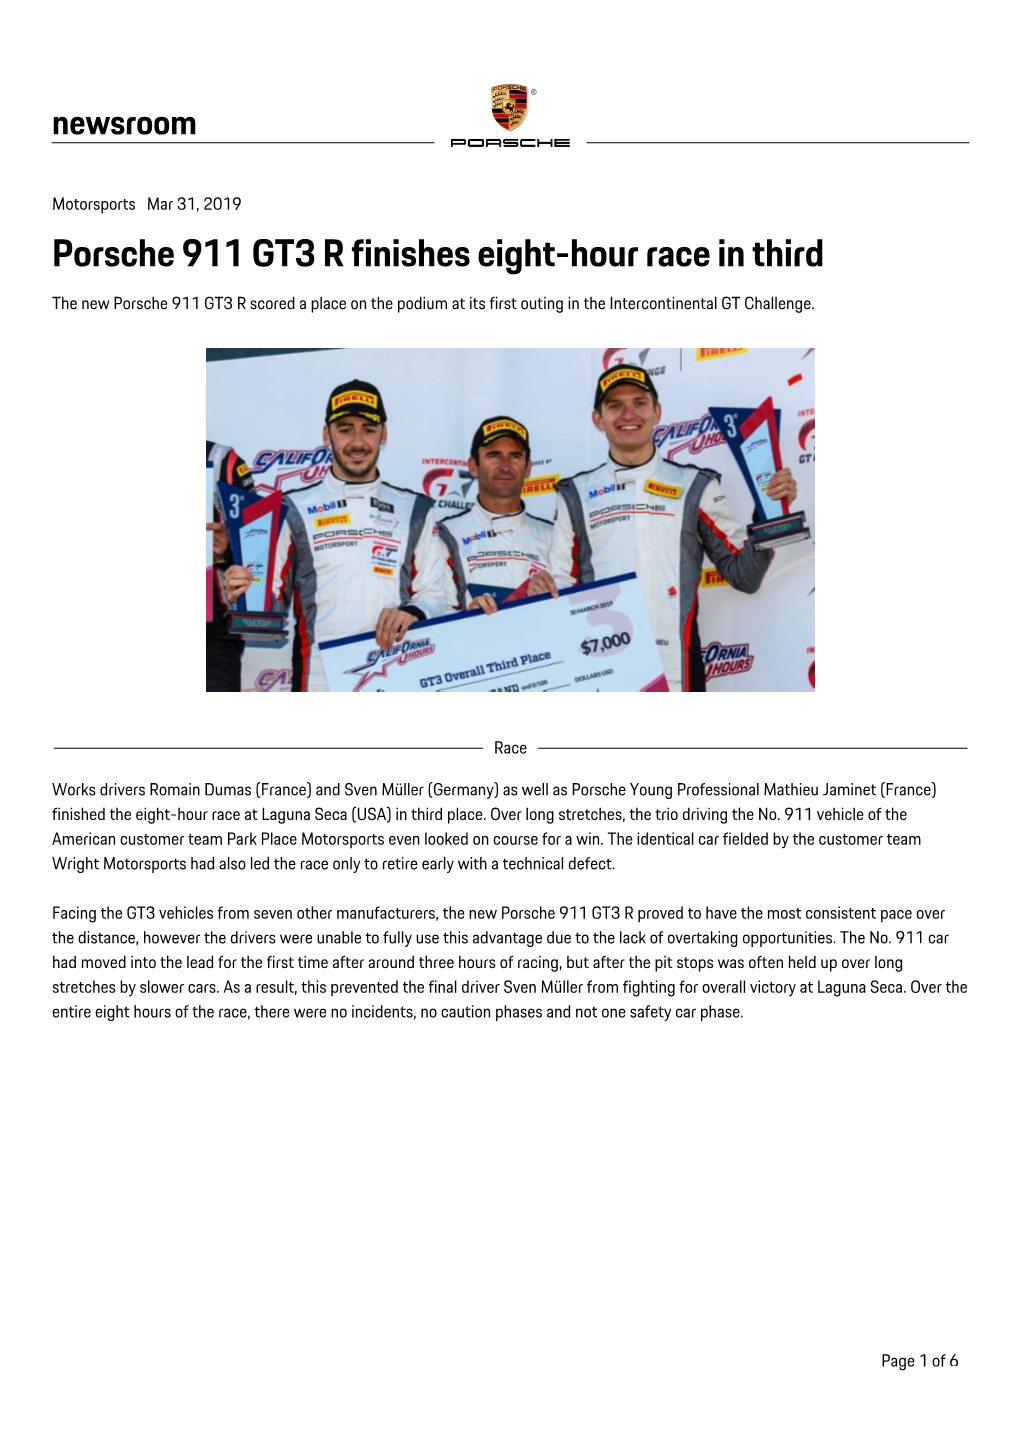 Porsche 911 GT3 R Finishes Eight-Hour Race in Third the New Porsche 911 GT3 R Scored a Place on the Podium at Its First Outing in the Intercontinental GT Challenge